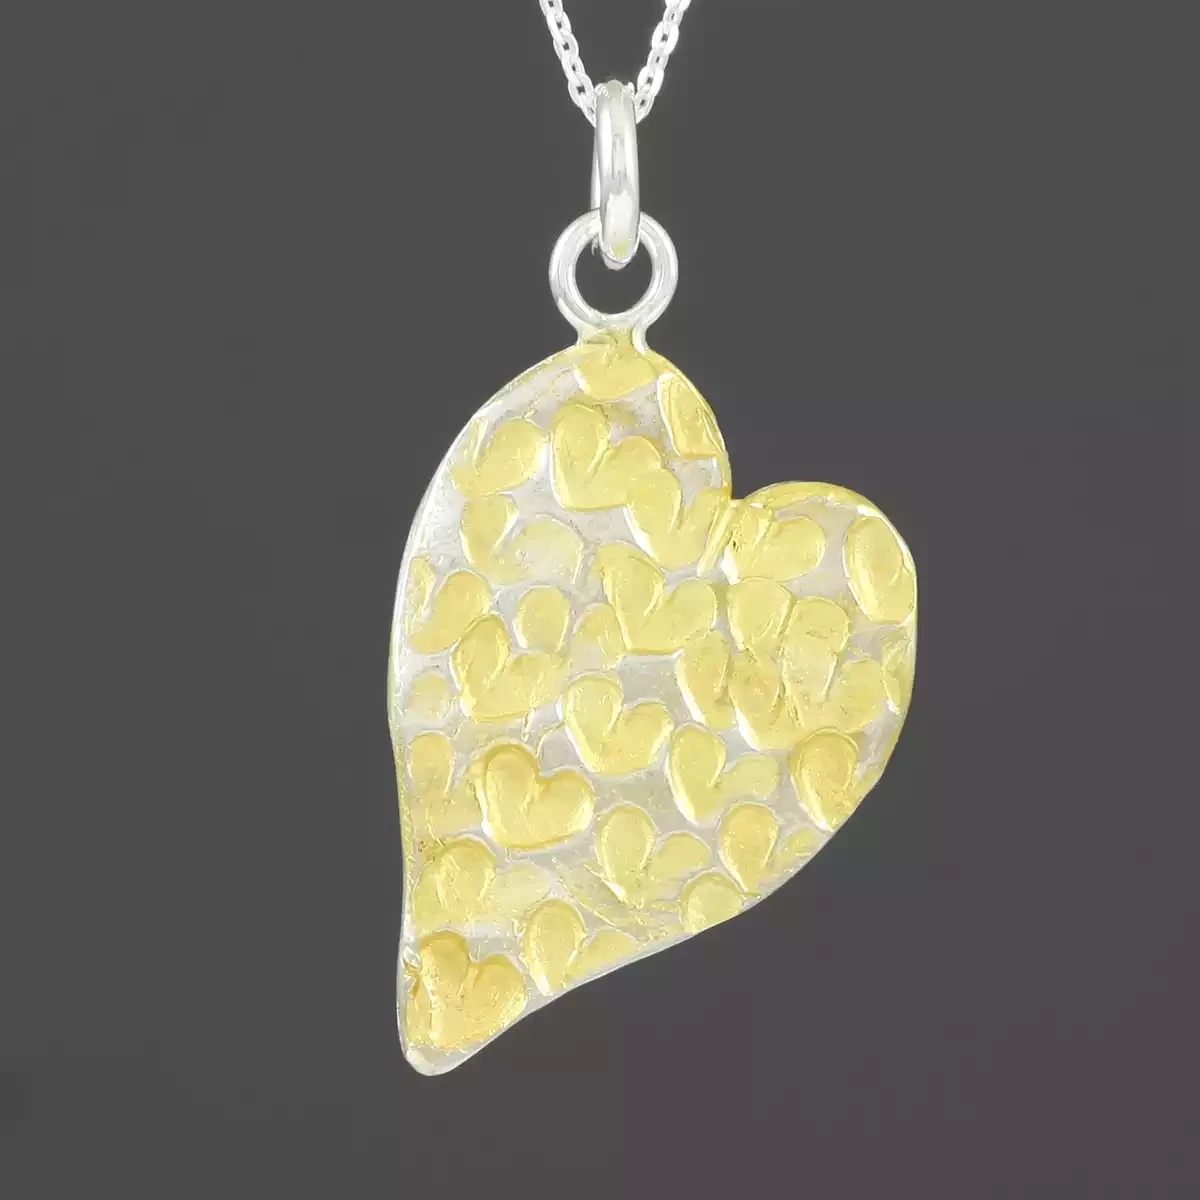 Heart-stamped Gold Plate Heart Pendant - Large by Fi Mehra